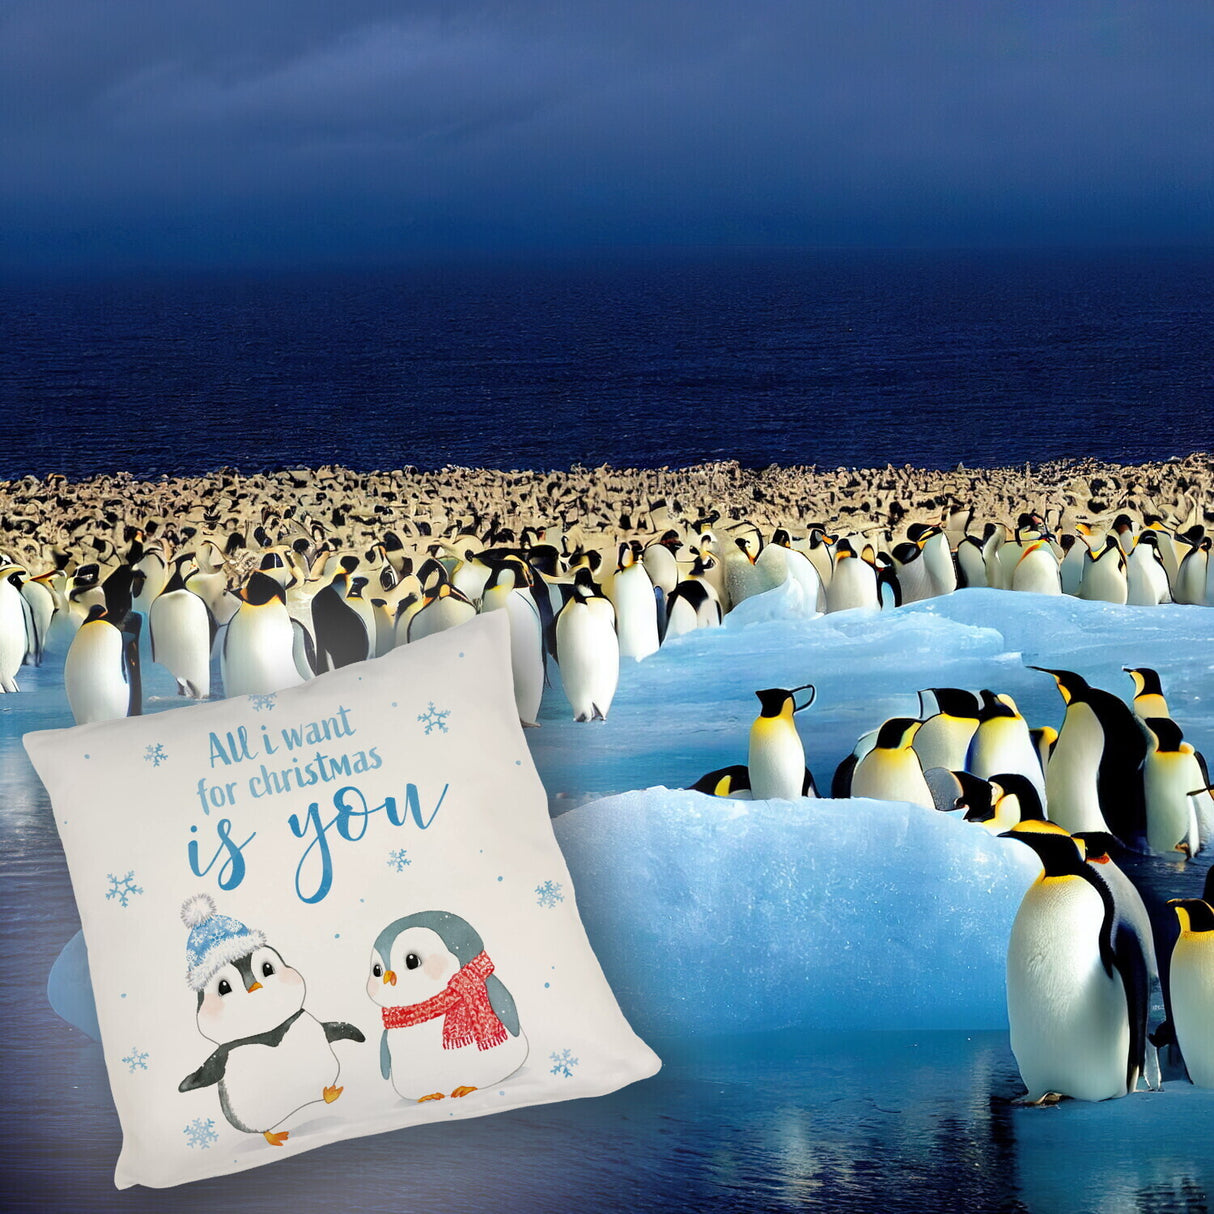 Pinguin Kissen mit Spruch All i want for christmas is you